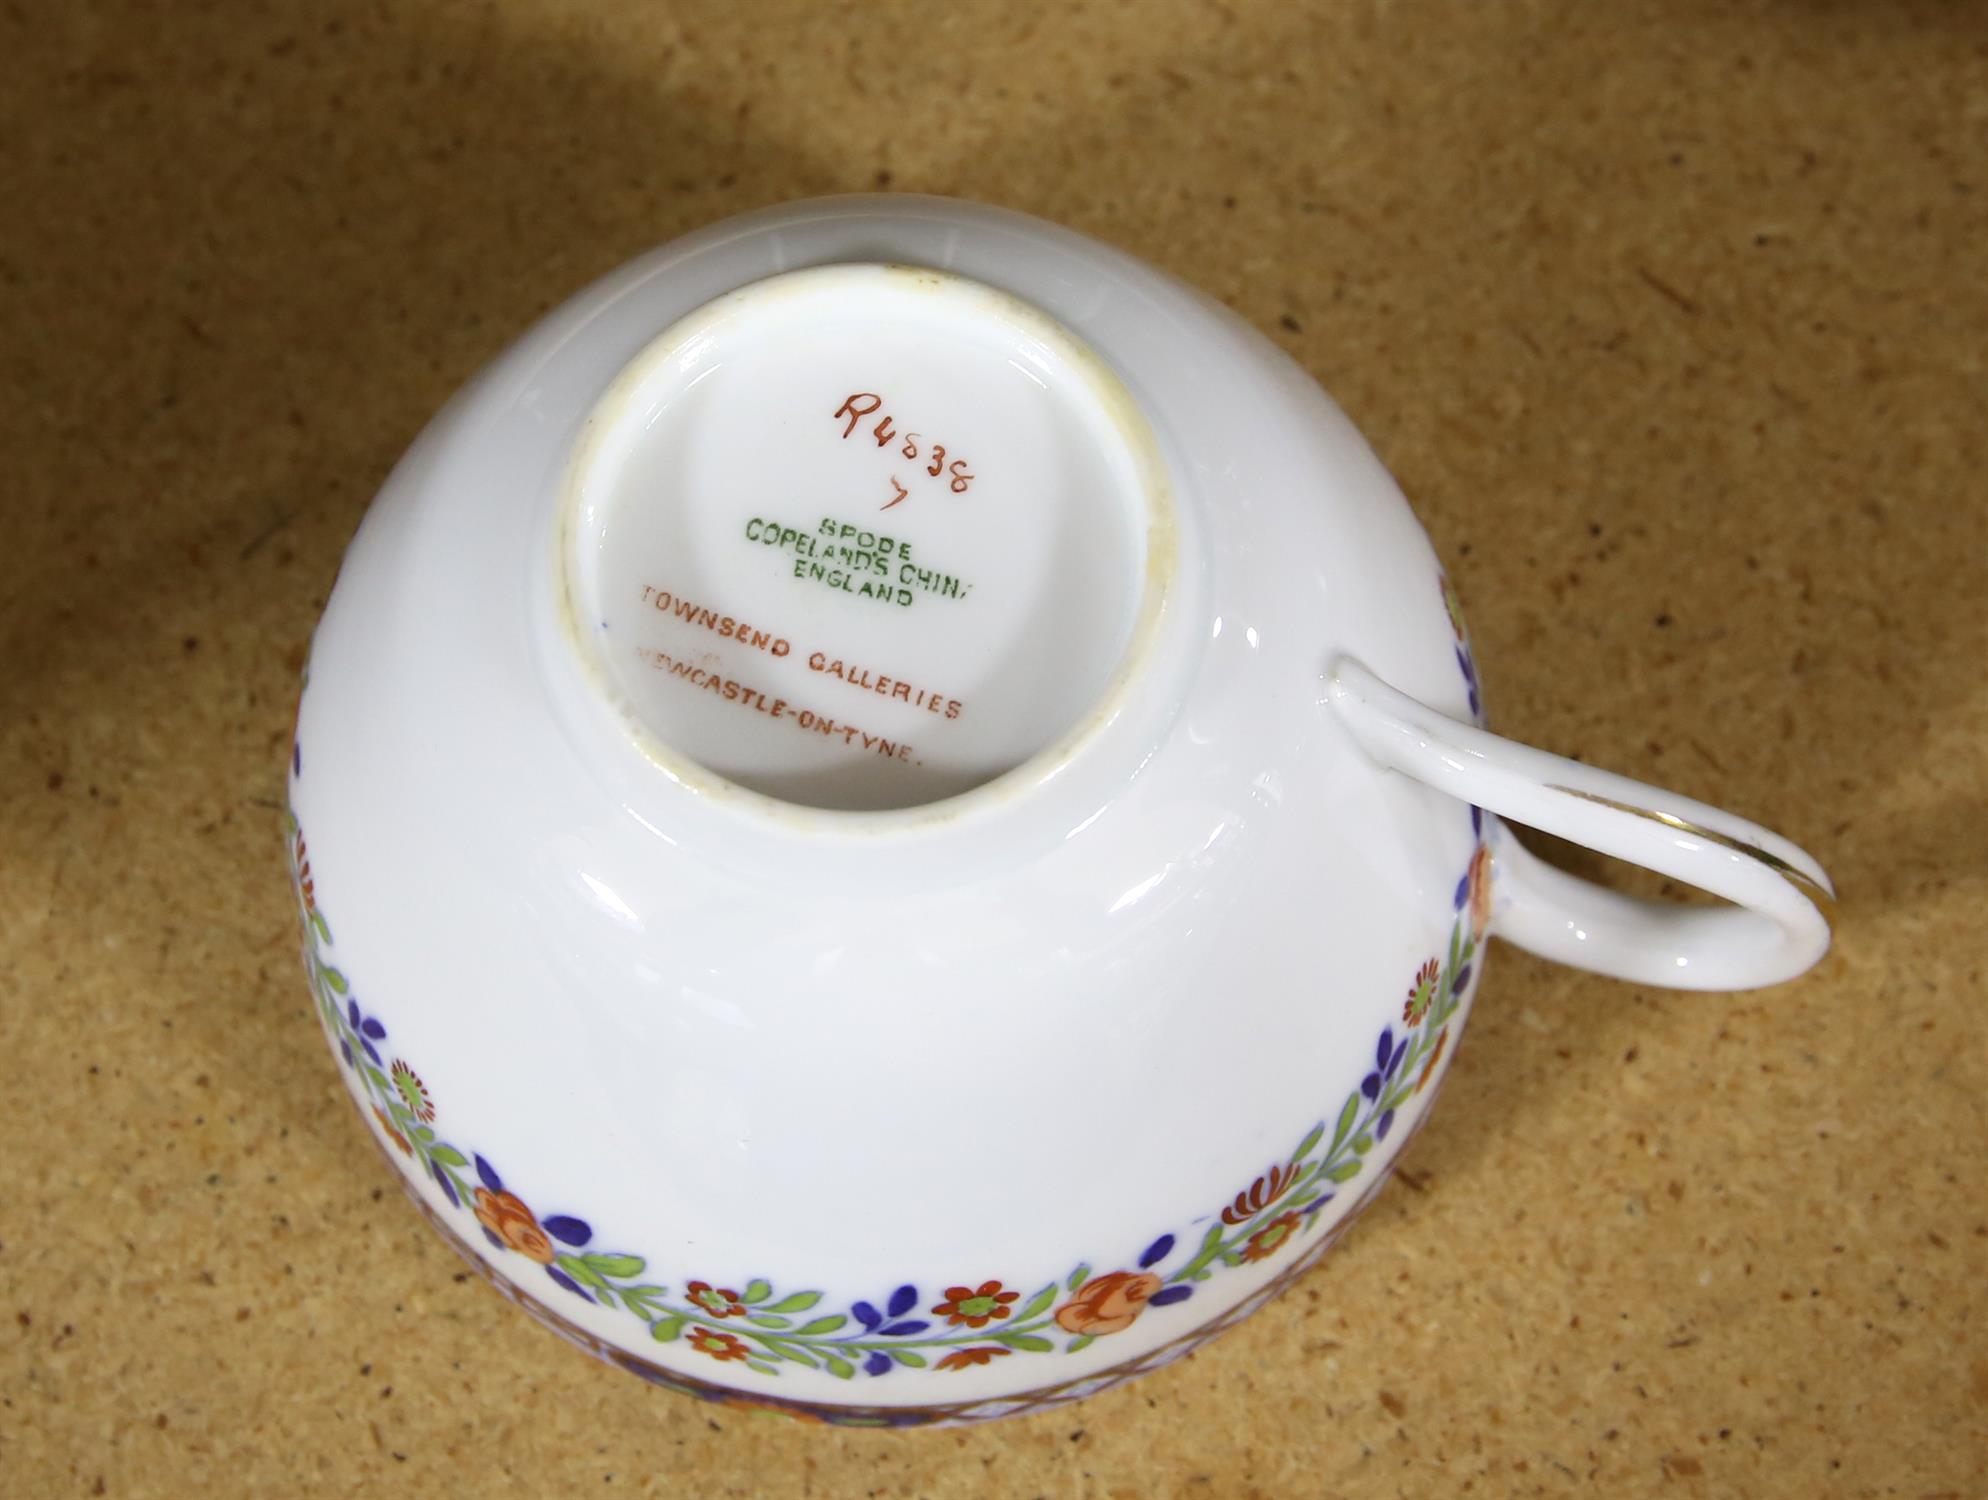 Spode Copelands part tea service, retailed by Townsend Galleries, Newcastle-on-Tyne, - Image 3 of 3